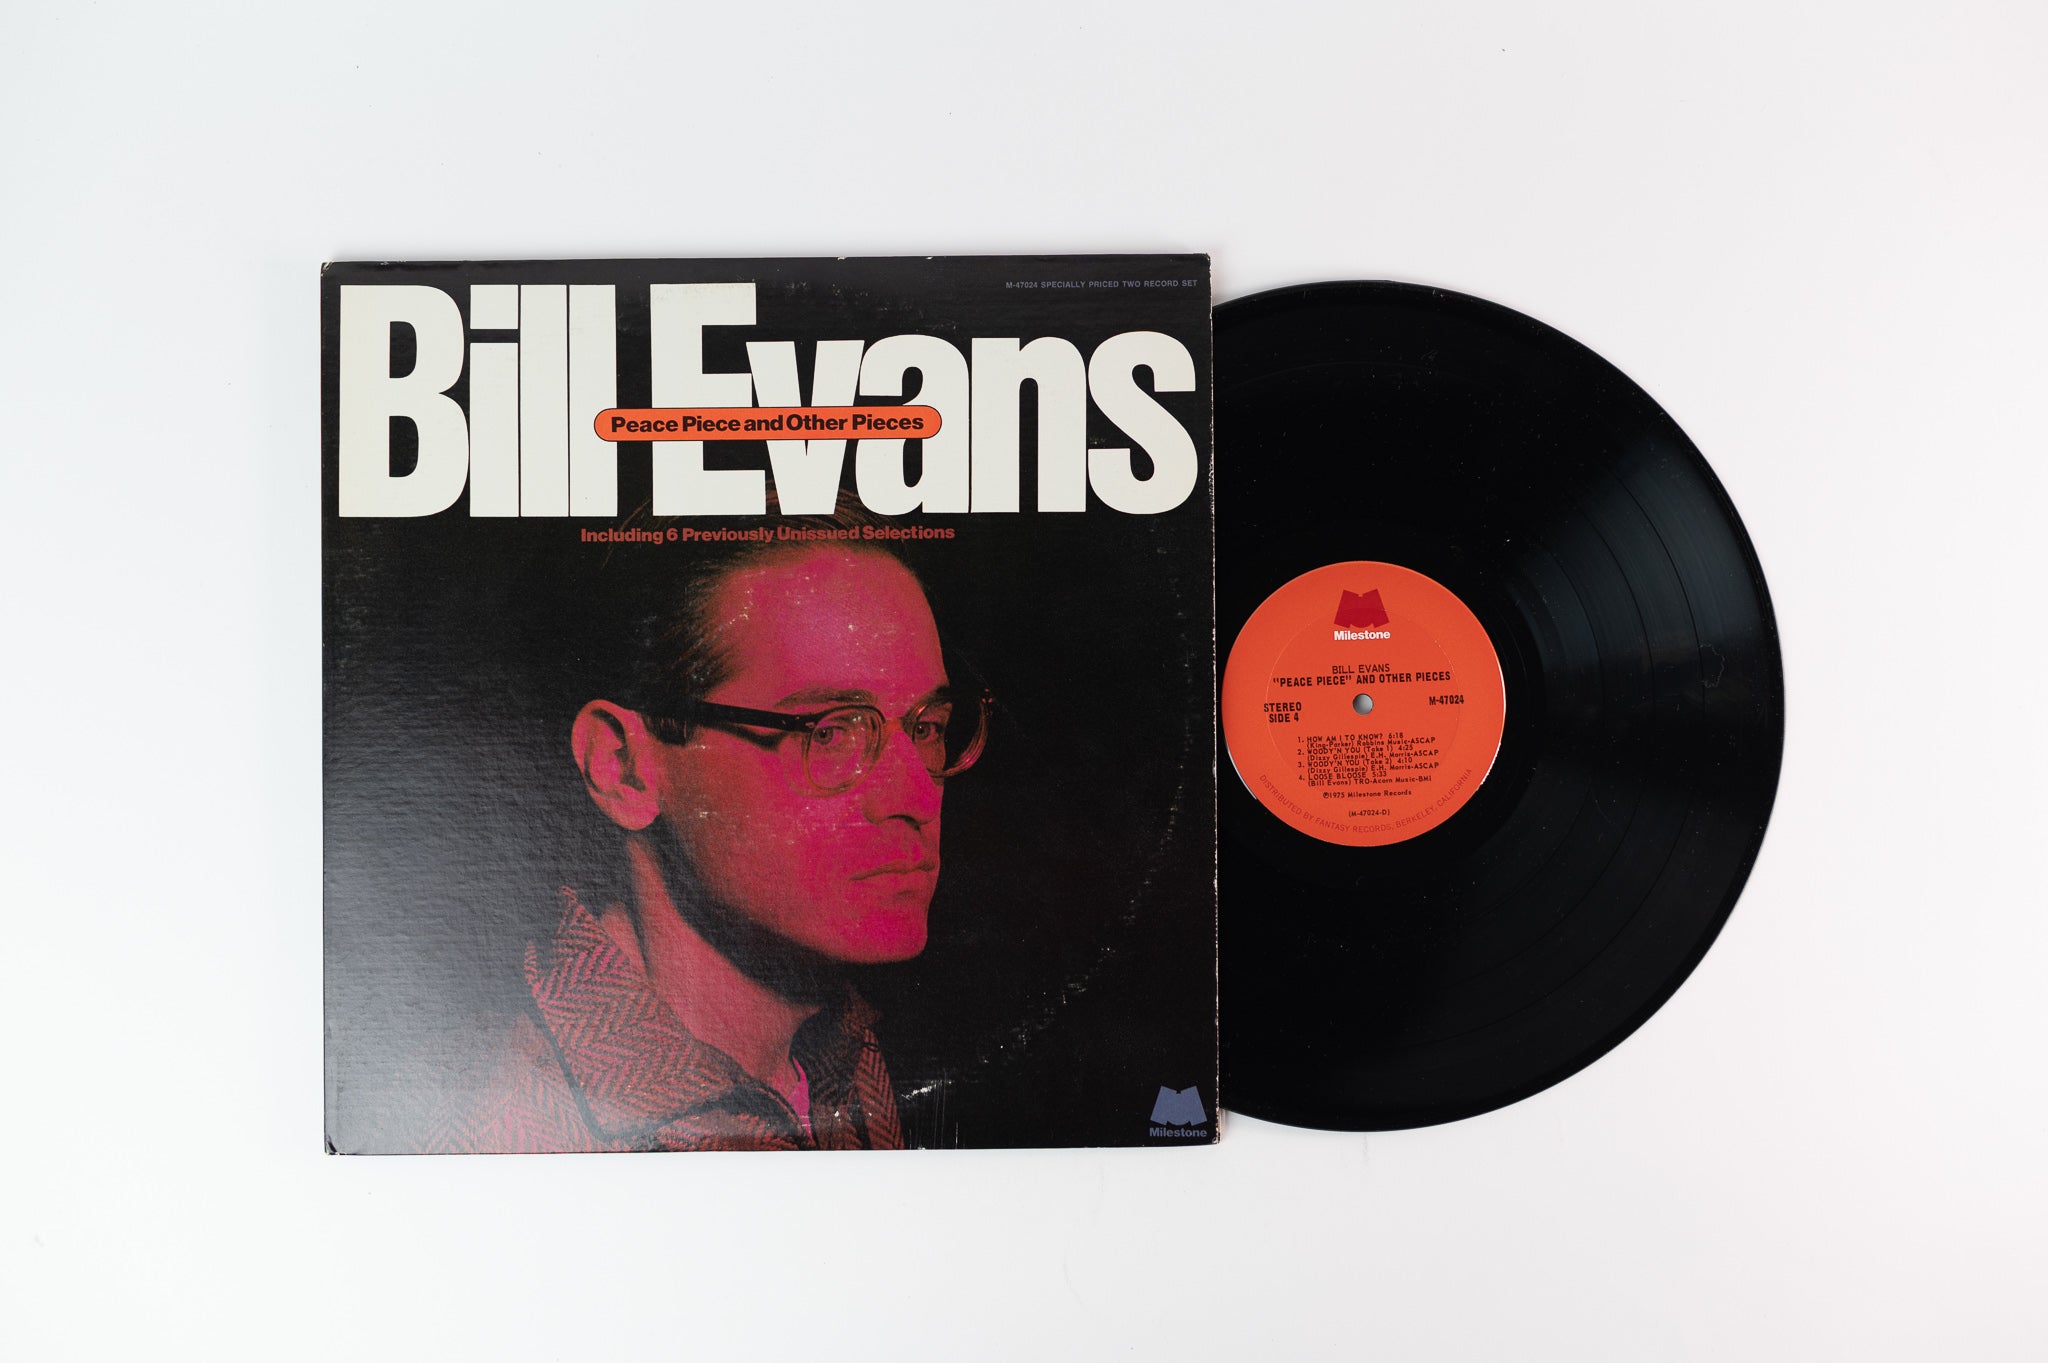 Bill Evans - Peace Piece And Other Pieces on Milestone